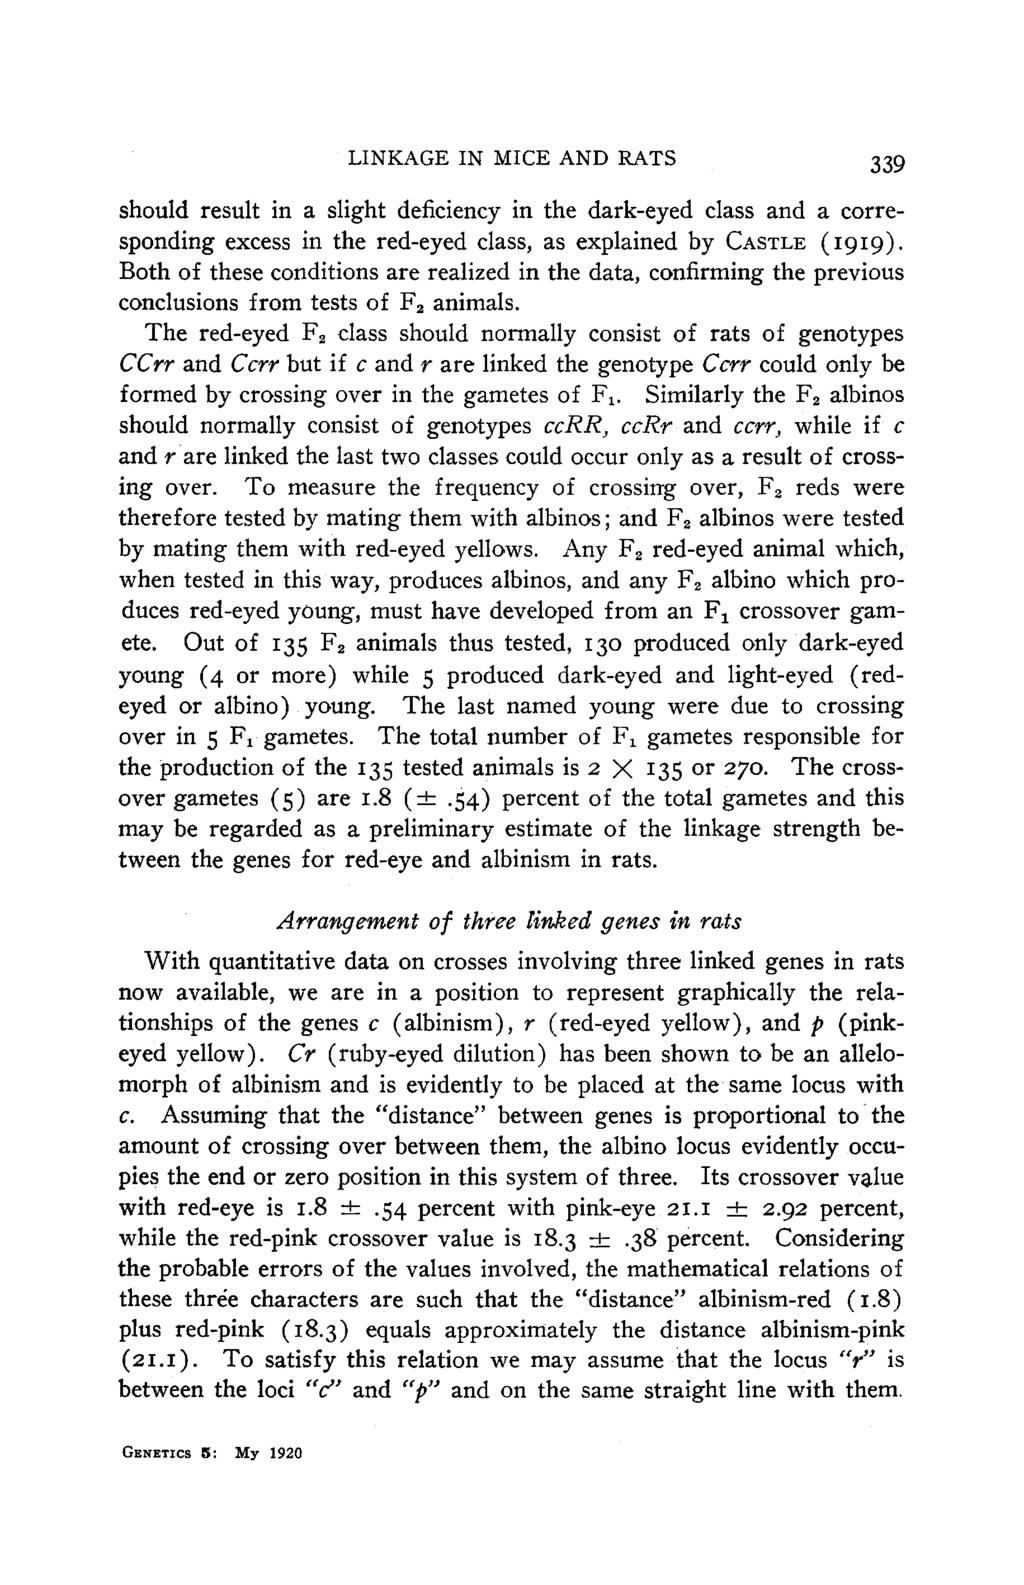 LINKAGE IN MICE AND RATS 339 should result in a slight deficiency in the dark-eyed class and a corresponding excess in the red-eyed class, as explained by CASTLE (1919).